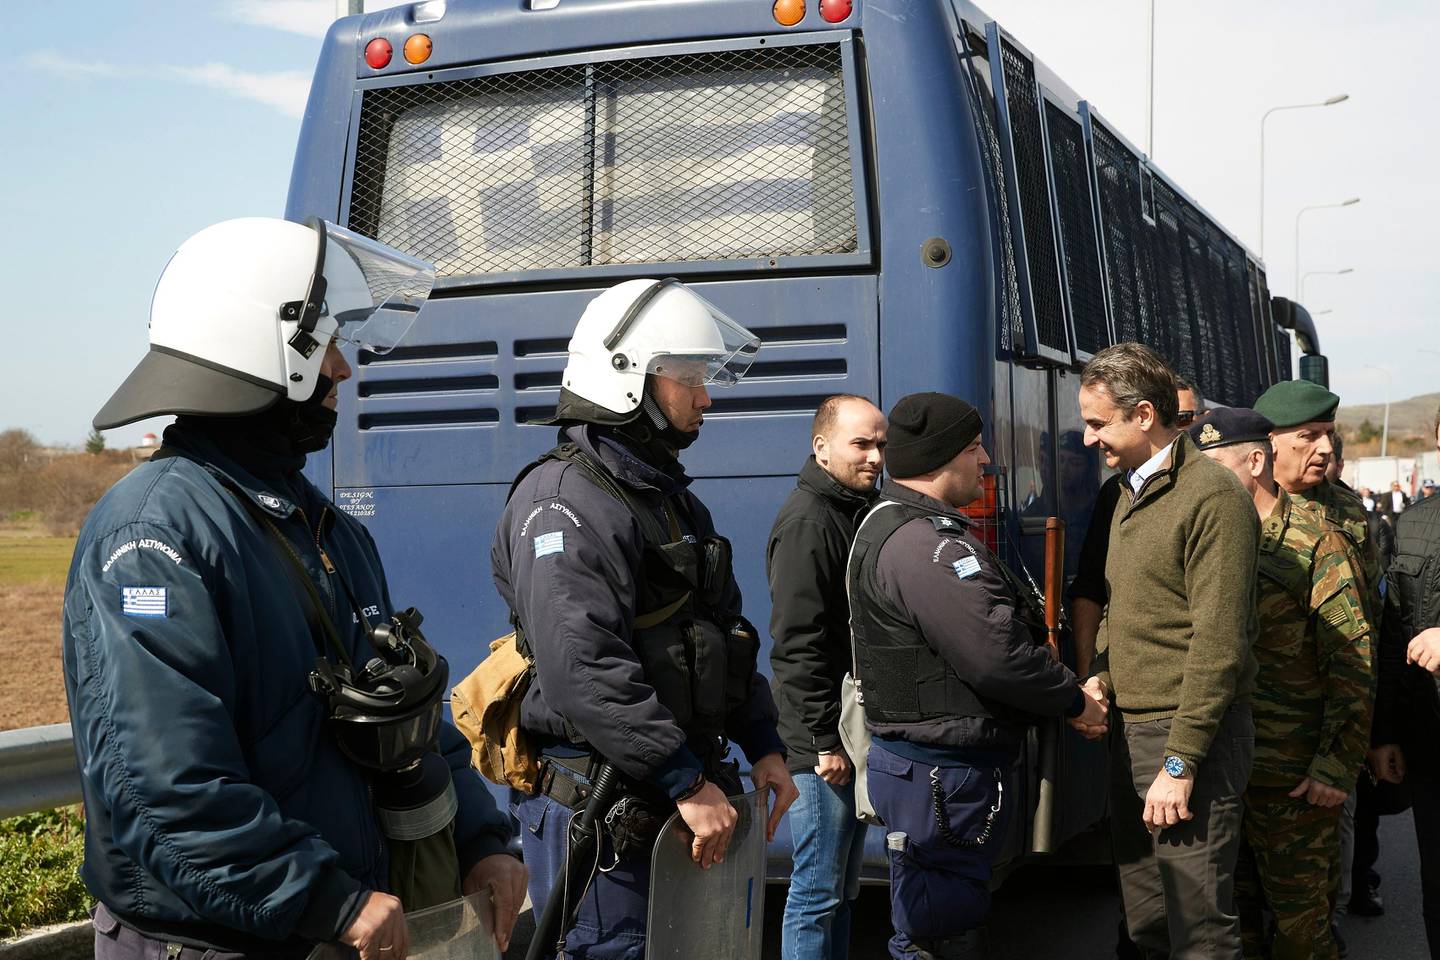 Greece's Prime Minister Kyriakos Mitsotakis, right, shakes hands with a police officer near the Kipoi border gate, Evros region, at the Greek-Turkish border on Tuesday, March 3, 2020. Migrants and refugees hoping to enter Greece from Turkey appeared to be fanning out across a broader swathe of the roughly 200-kilometer-long land border Tuesday, maintaining pressure on the frontier after Ankara declared its borders with the European Union open. (Dimitris Papamitsos/Greek Prime Minister's Office via AP)